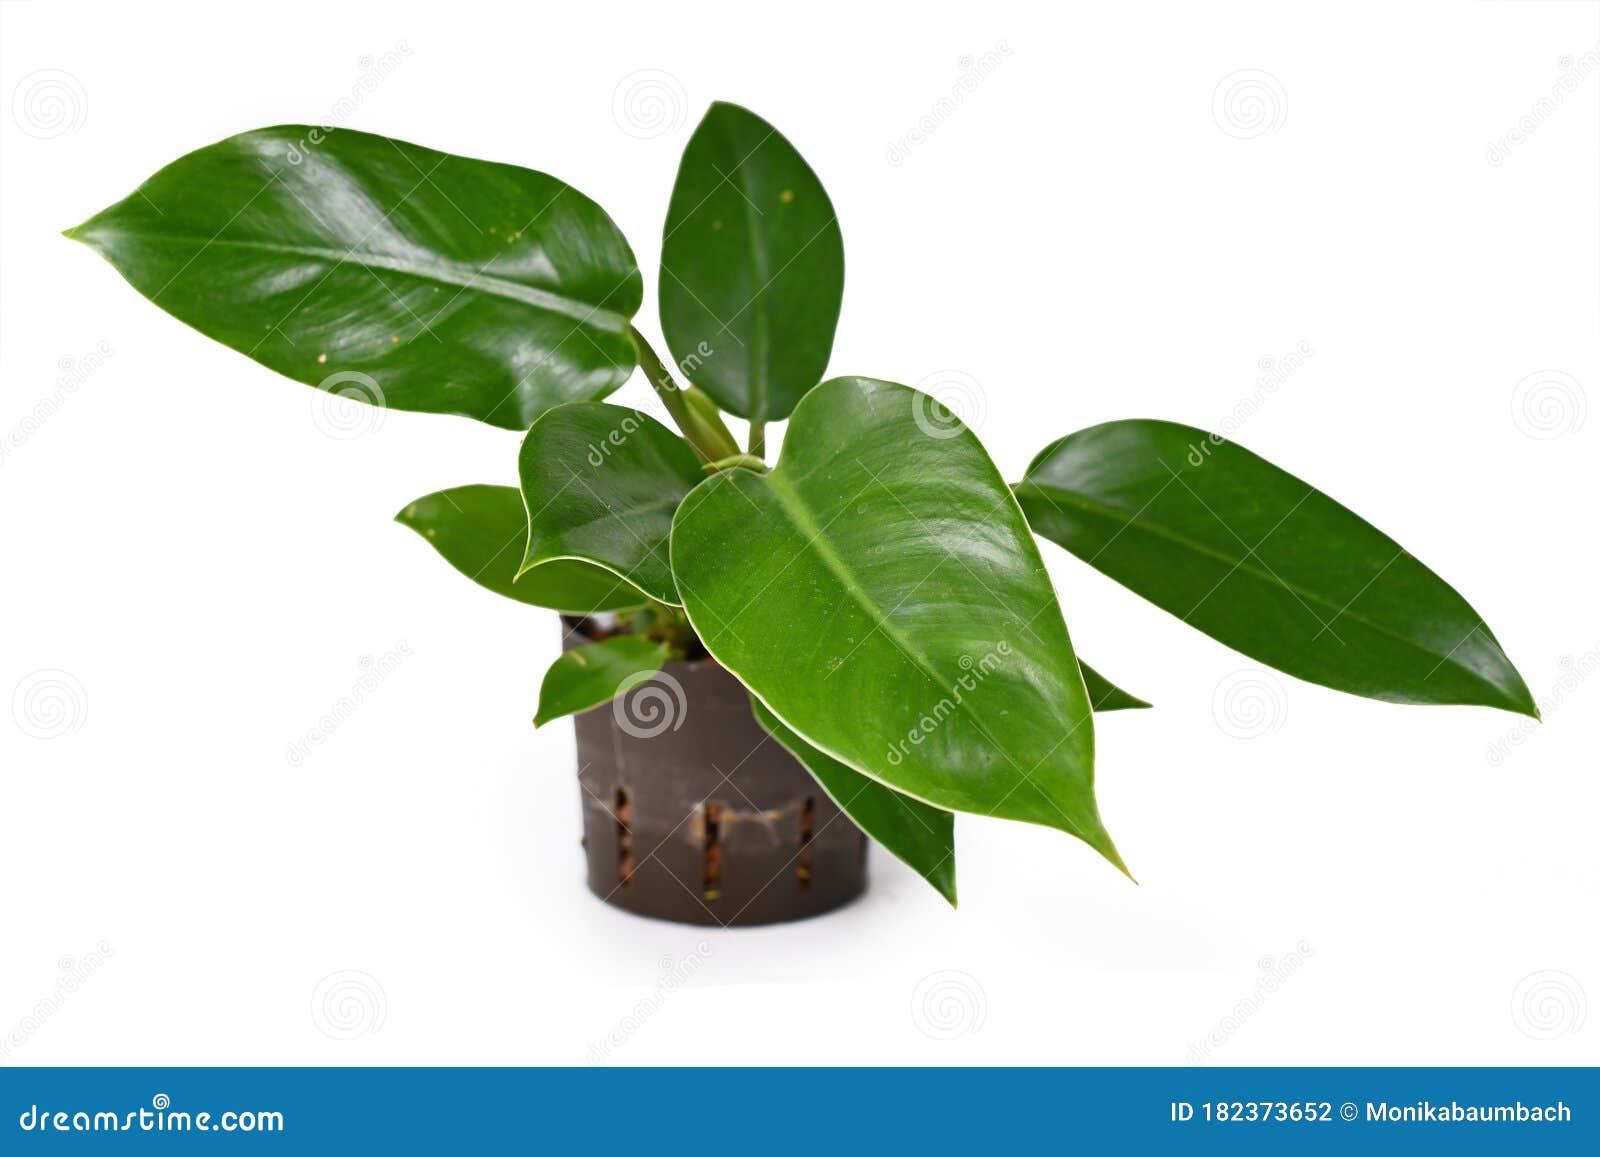 small `philodendron imperial green` house plant in hydroponics flower pot on white background